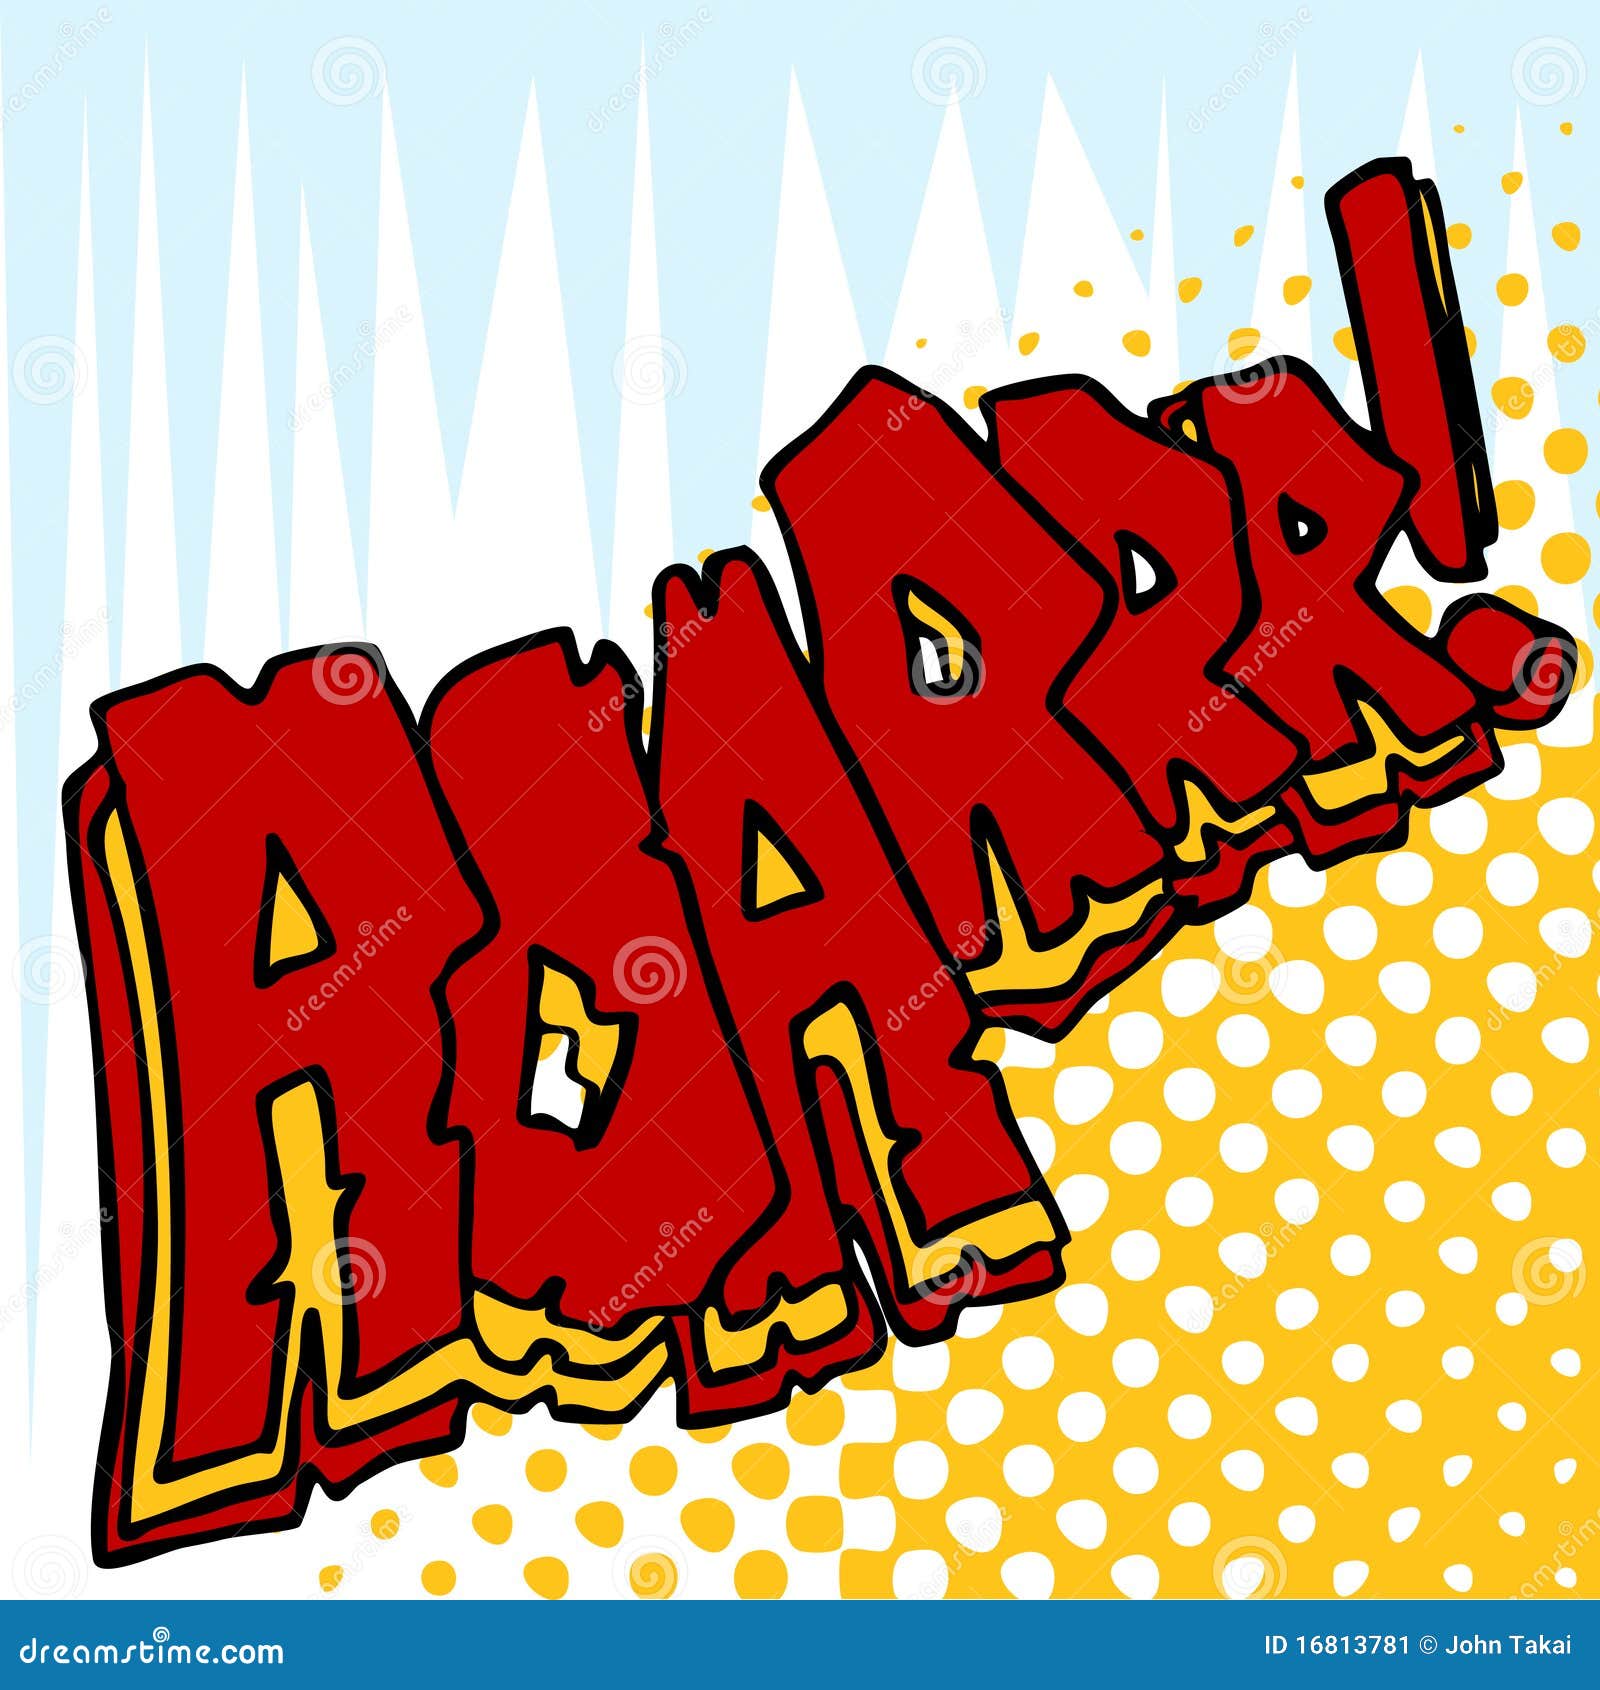 Angry Roar Sound Effect Stock Illustrations – 5 Angry Roar Sound Effect  Stock Illustrations, Vectors & Clipart - Dreamstime